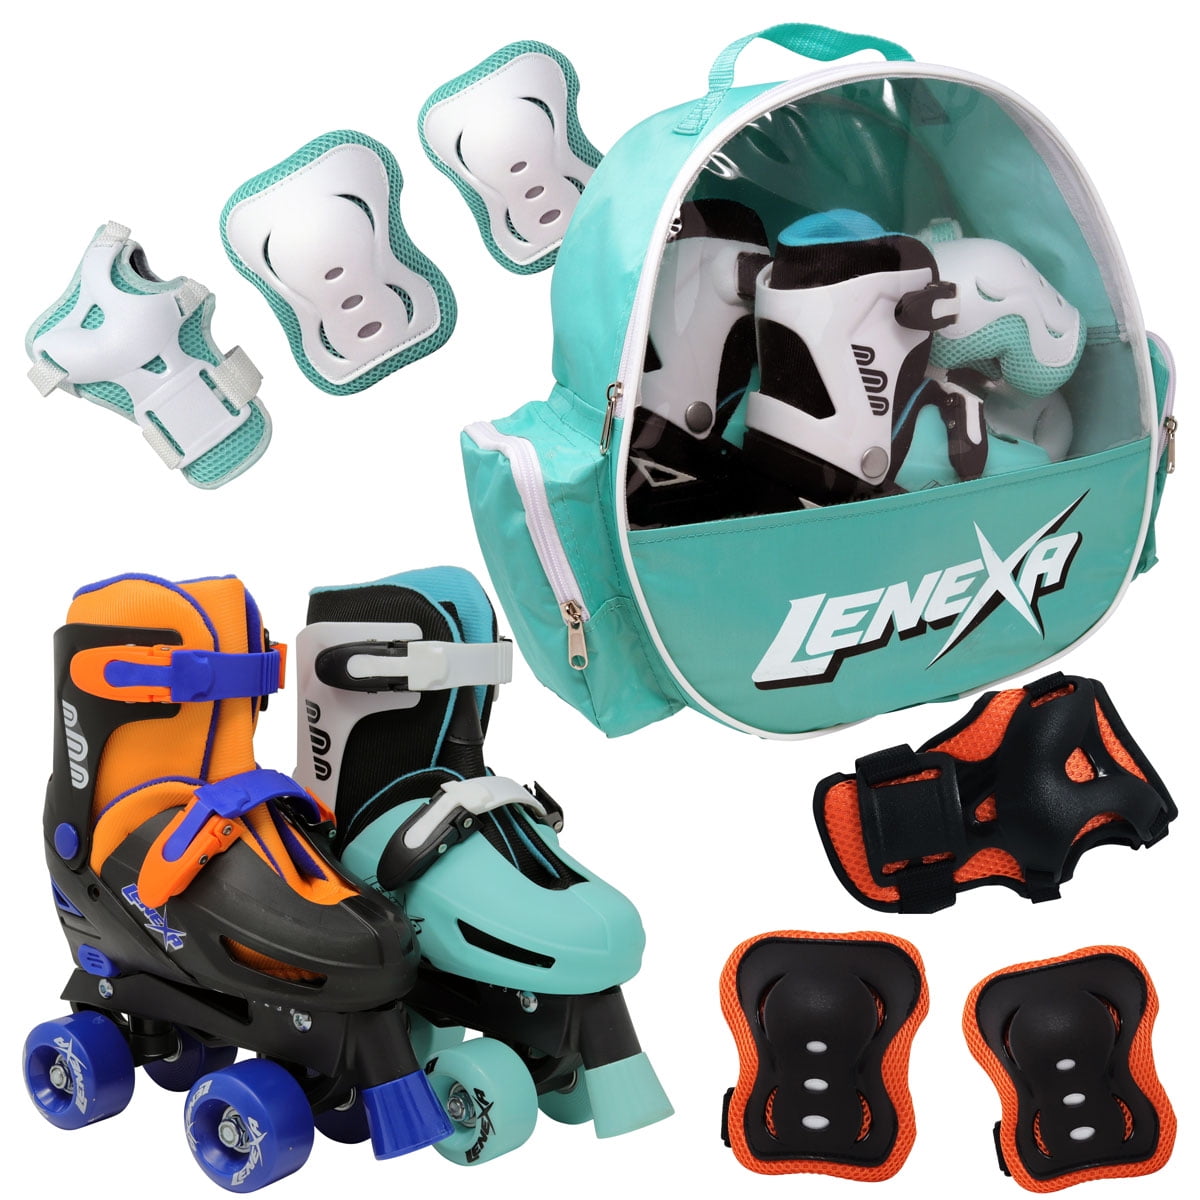 Lenexa Go-Gro Adjustable Skate Combo for Girls and Boys - Kids Roller Skates with Bag, Knee Pads, Elbow Pads and Wrist Guards